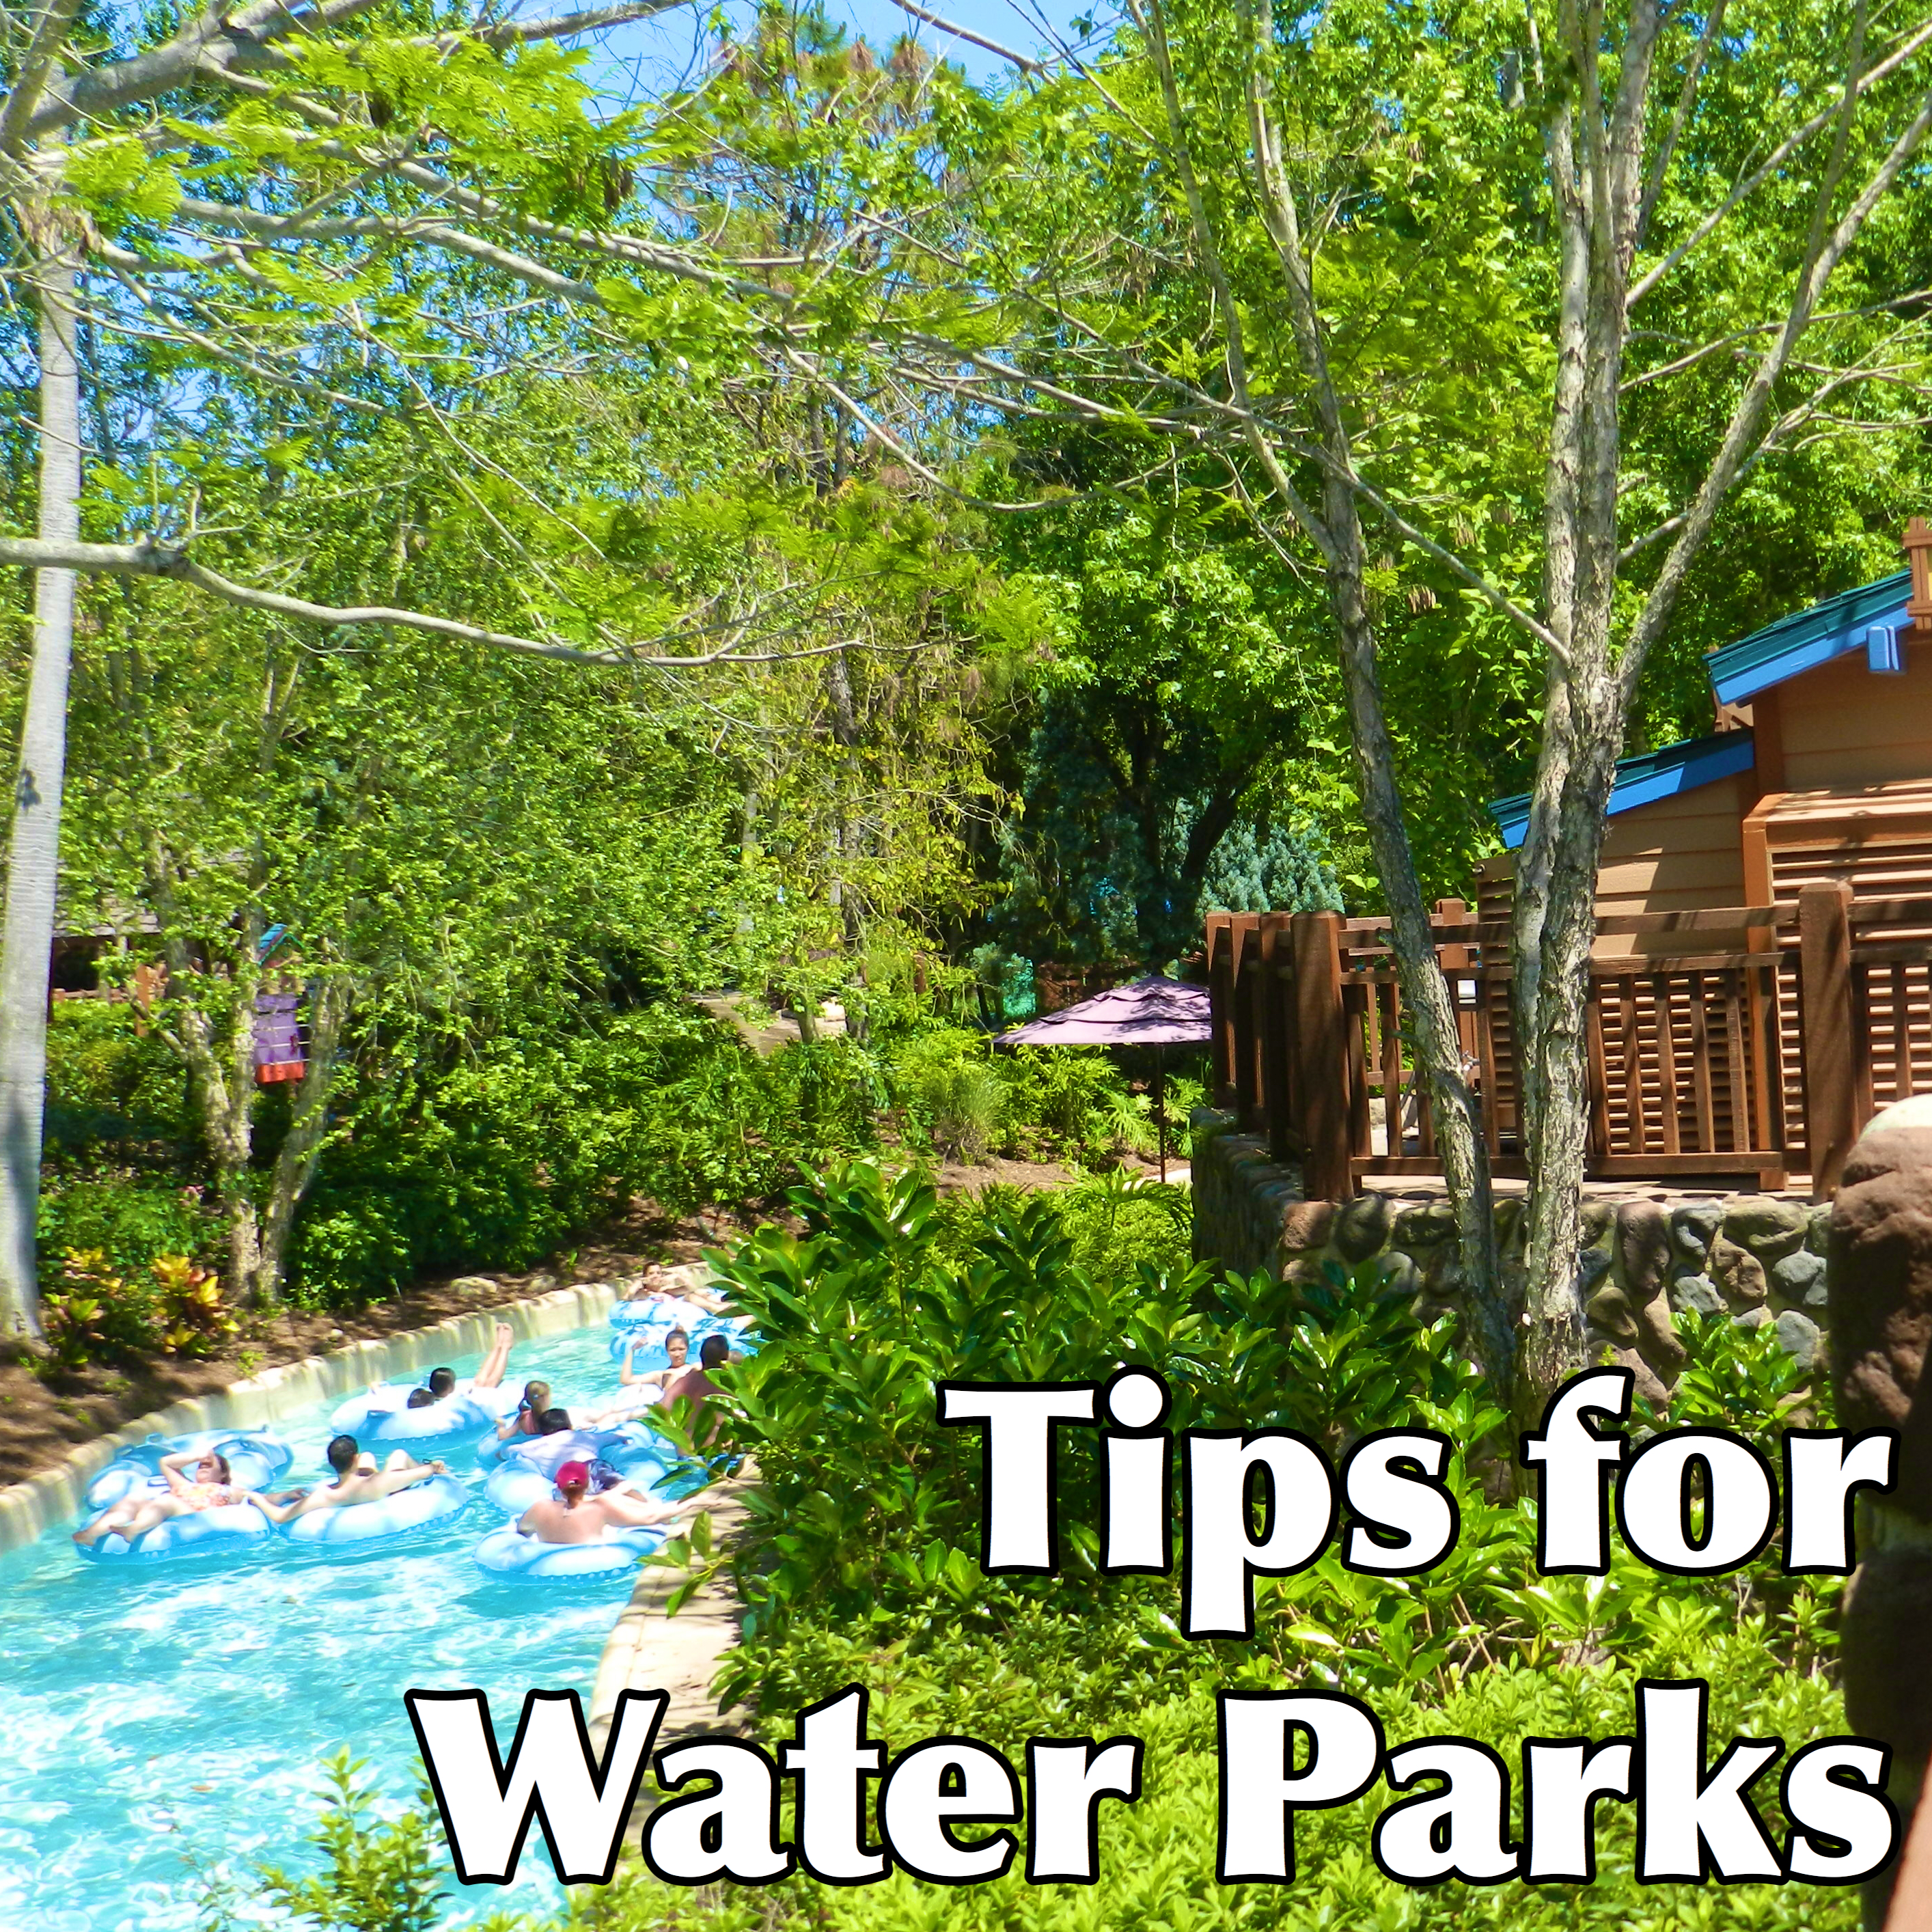 Best water park tips with Disney Blizzard Beach Lazy River in the Background.